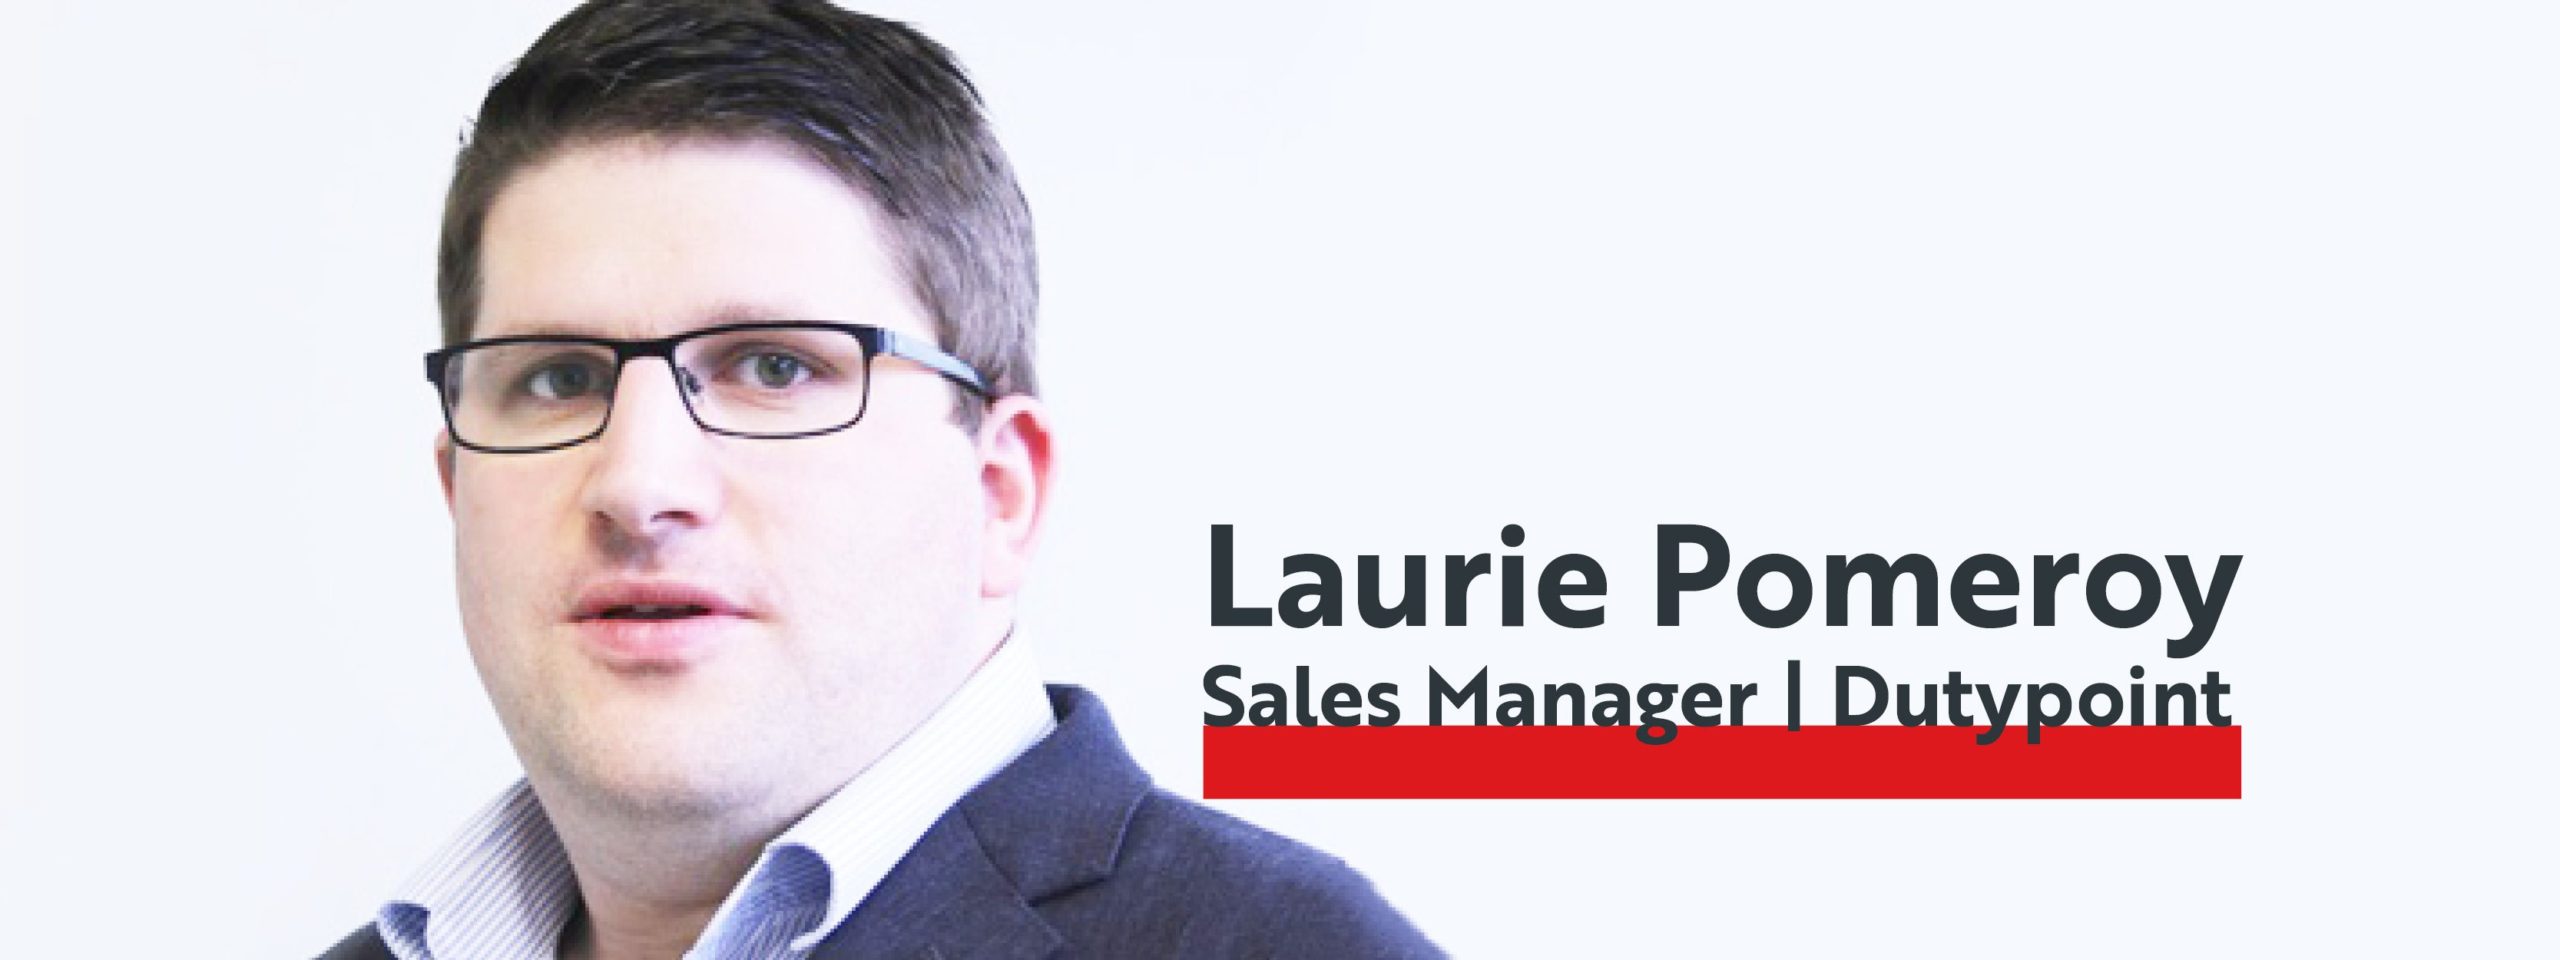 Introducing Laurie Pomeroy - Dutypoint Sales Manager